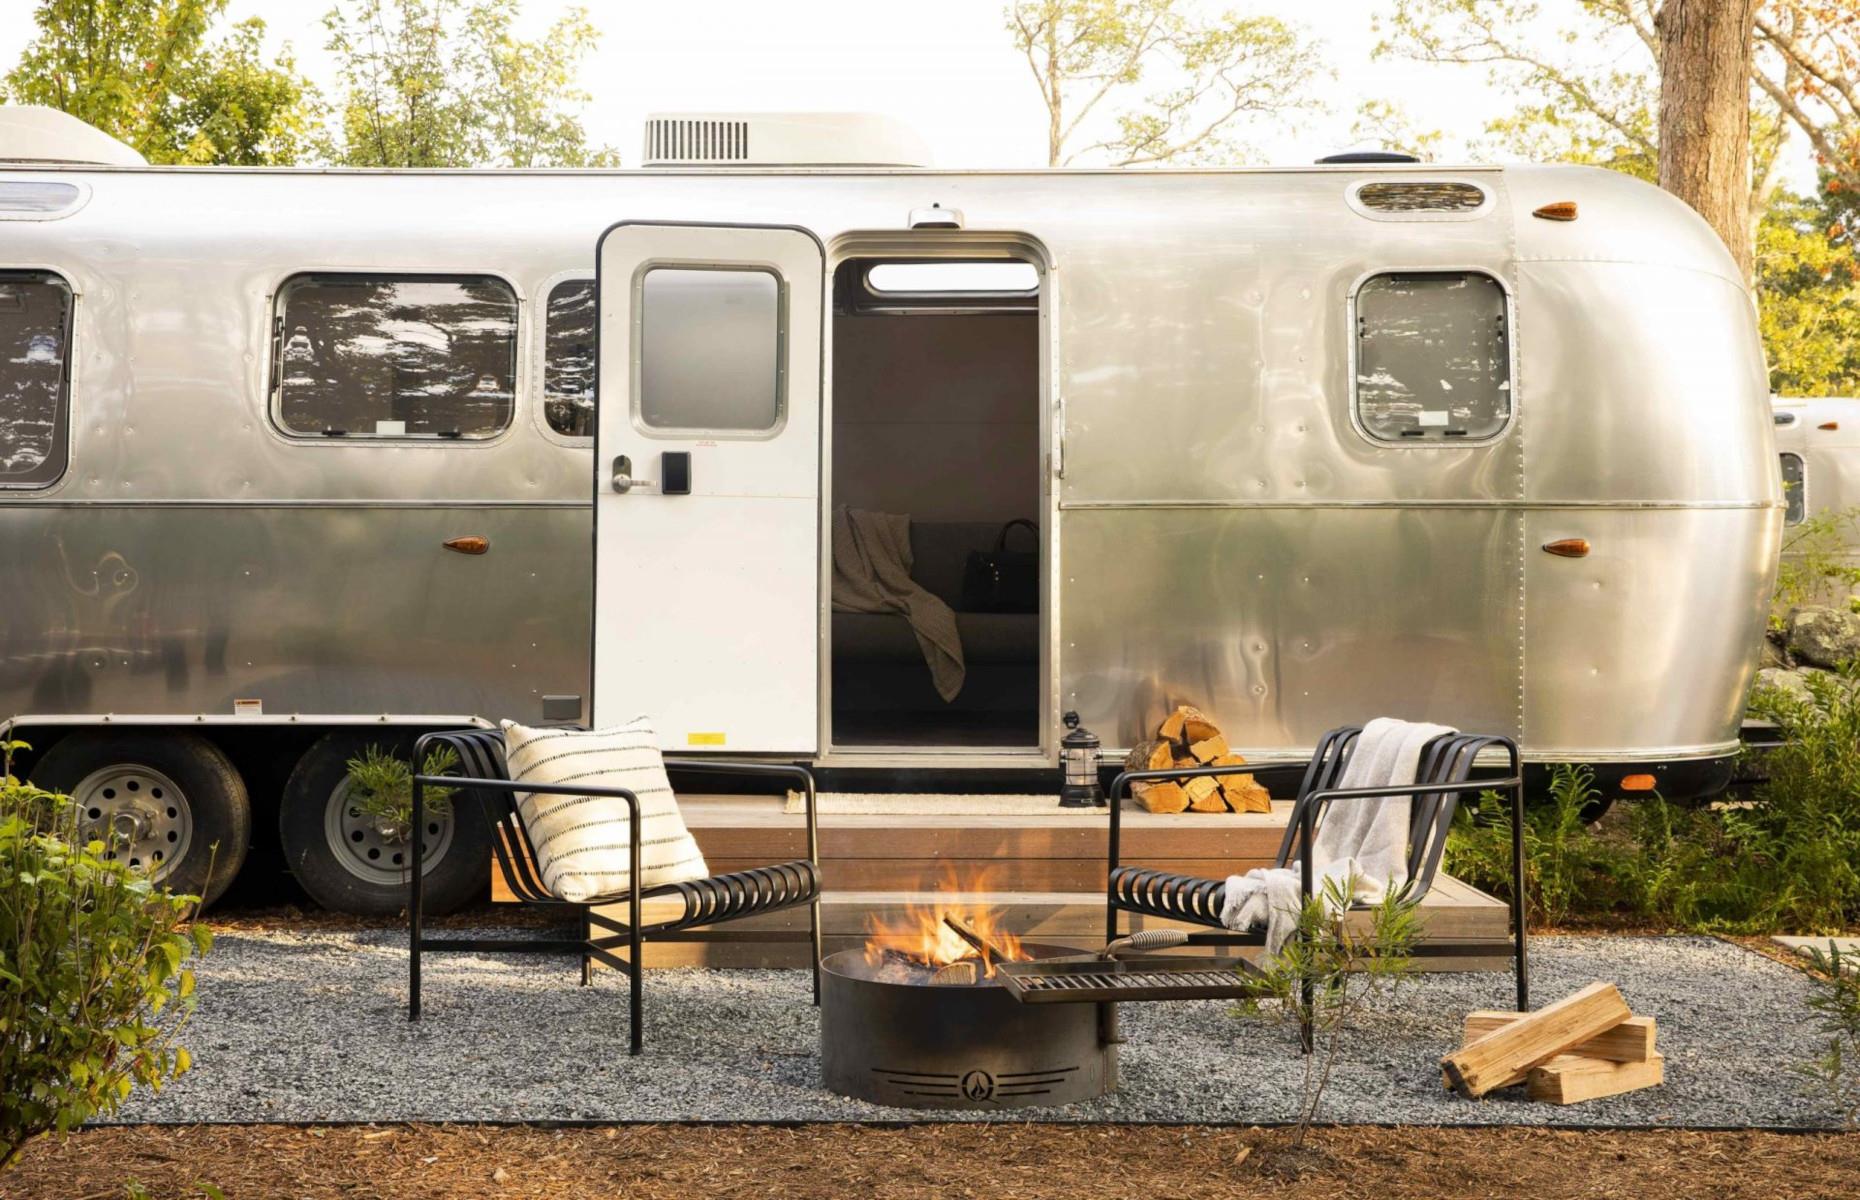 <p>Perfect for a luxurious romantic getaway or even a family adventure, these Cape Cod <a href="https://autocamp.com/property/cape-cod-premium-airstream-suite/">Premium Airstream Suites</a> are the height of decadent comfort in the midst of the great outdoors.</p>  <p>Design and durability meet, with beautifully designed interiors enclosed in that classic aluminium shell.</p>